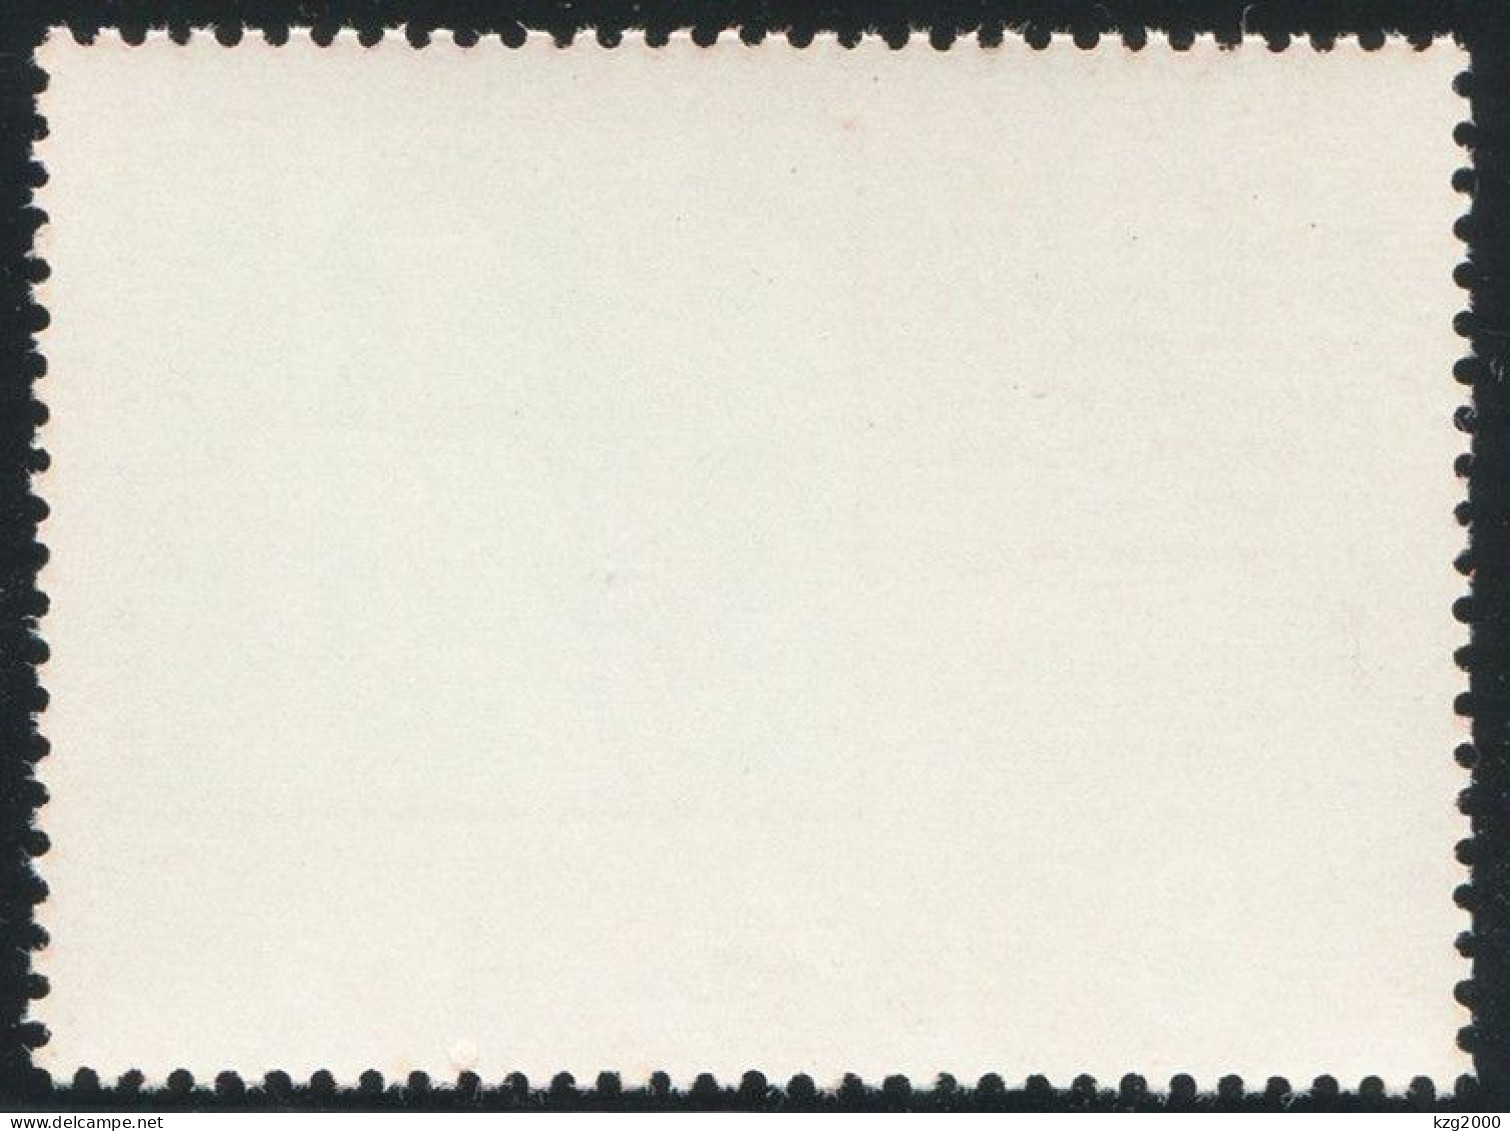 China Stamp 1968 W9 Mao Tse-tung’s Statement Of Support Of Afro-Americans OG MNH Stamps - Ongebruikt